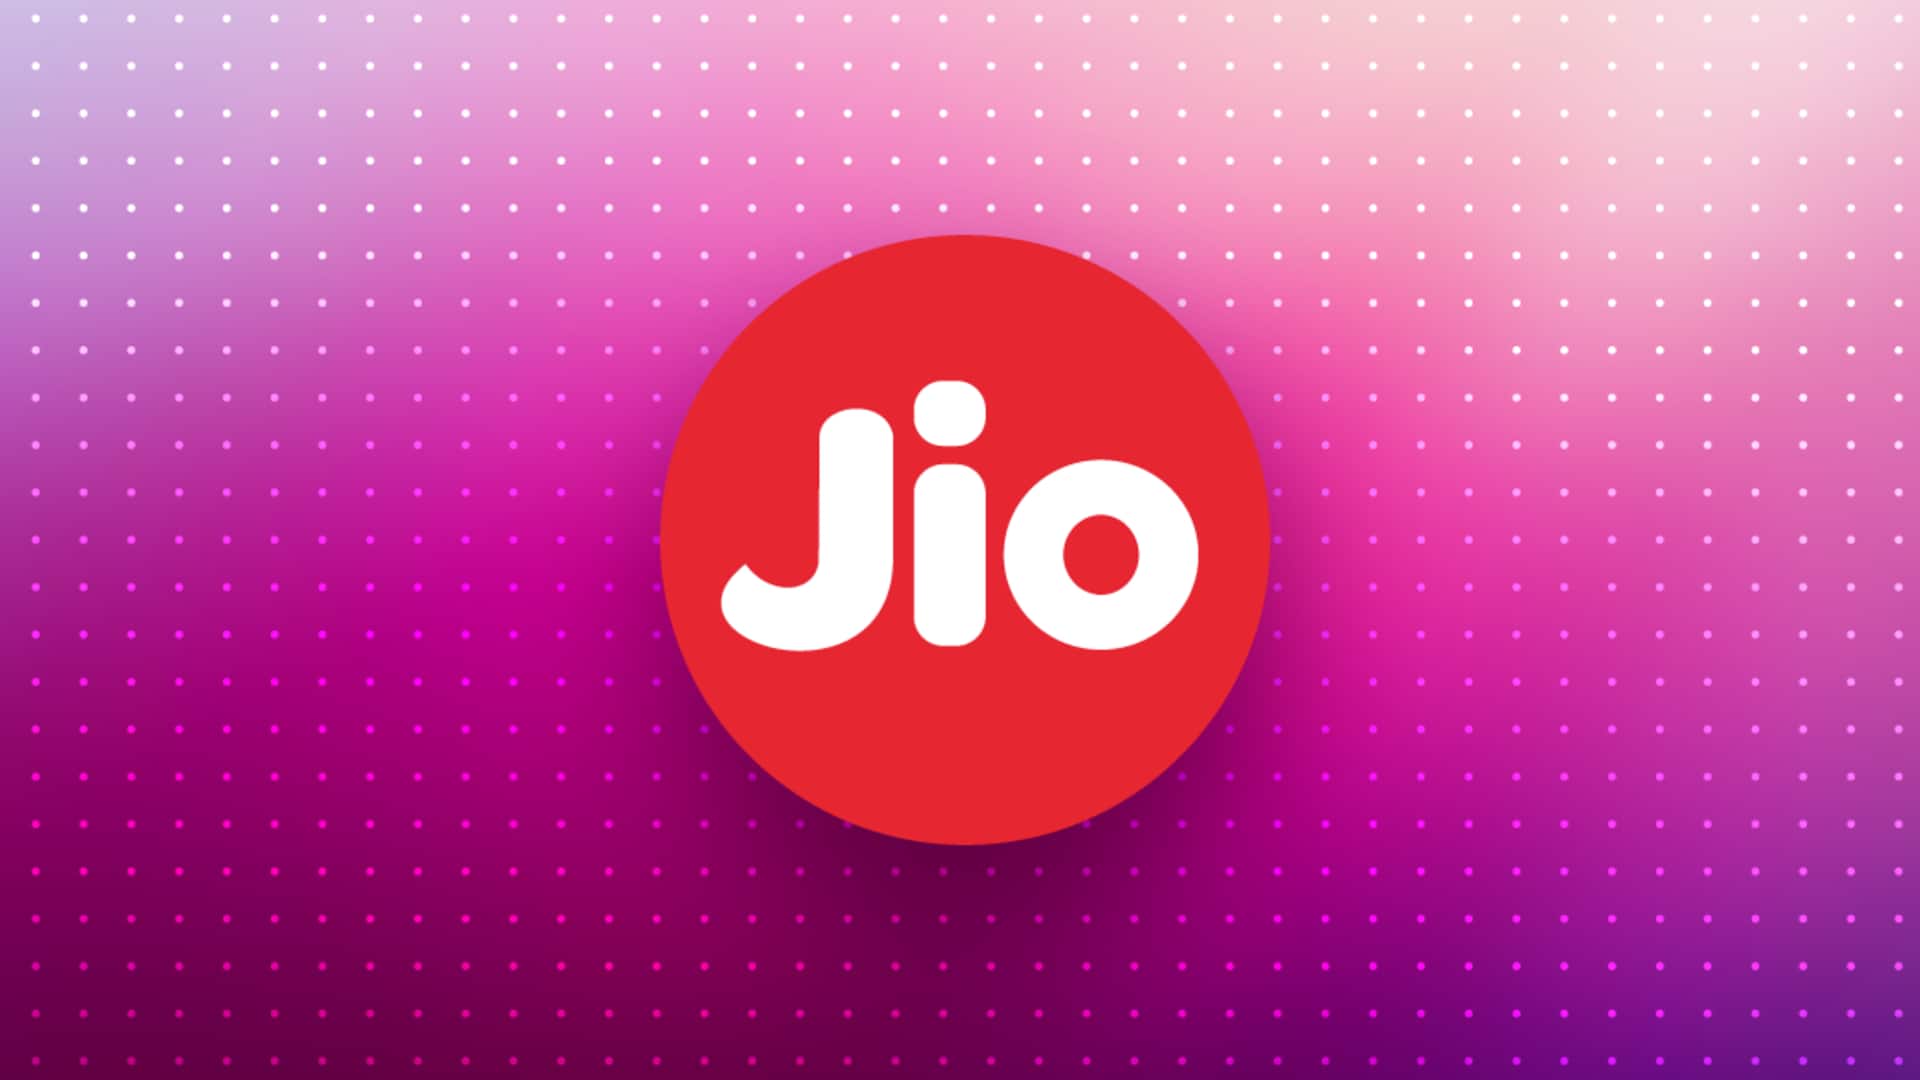 These Reliance Jio prepaid plans offer 3GB of data daily